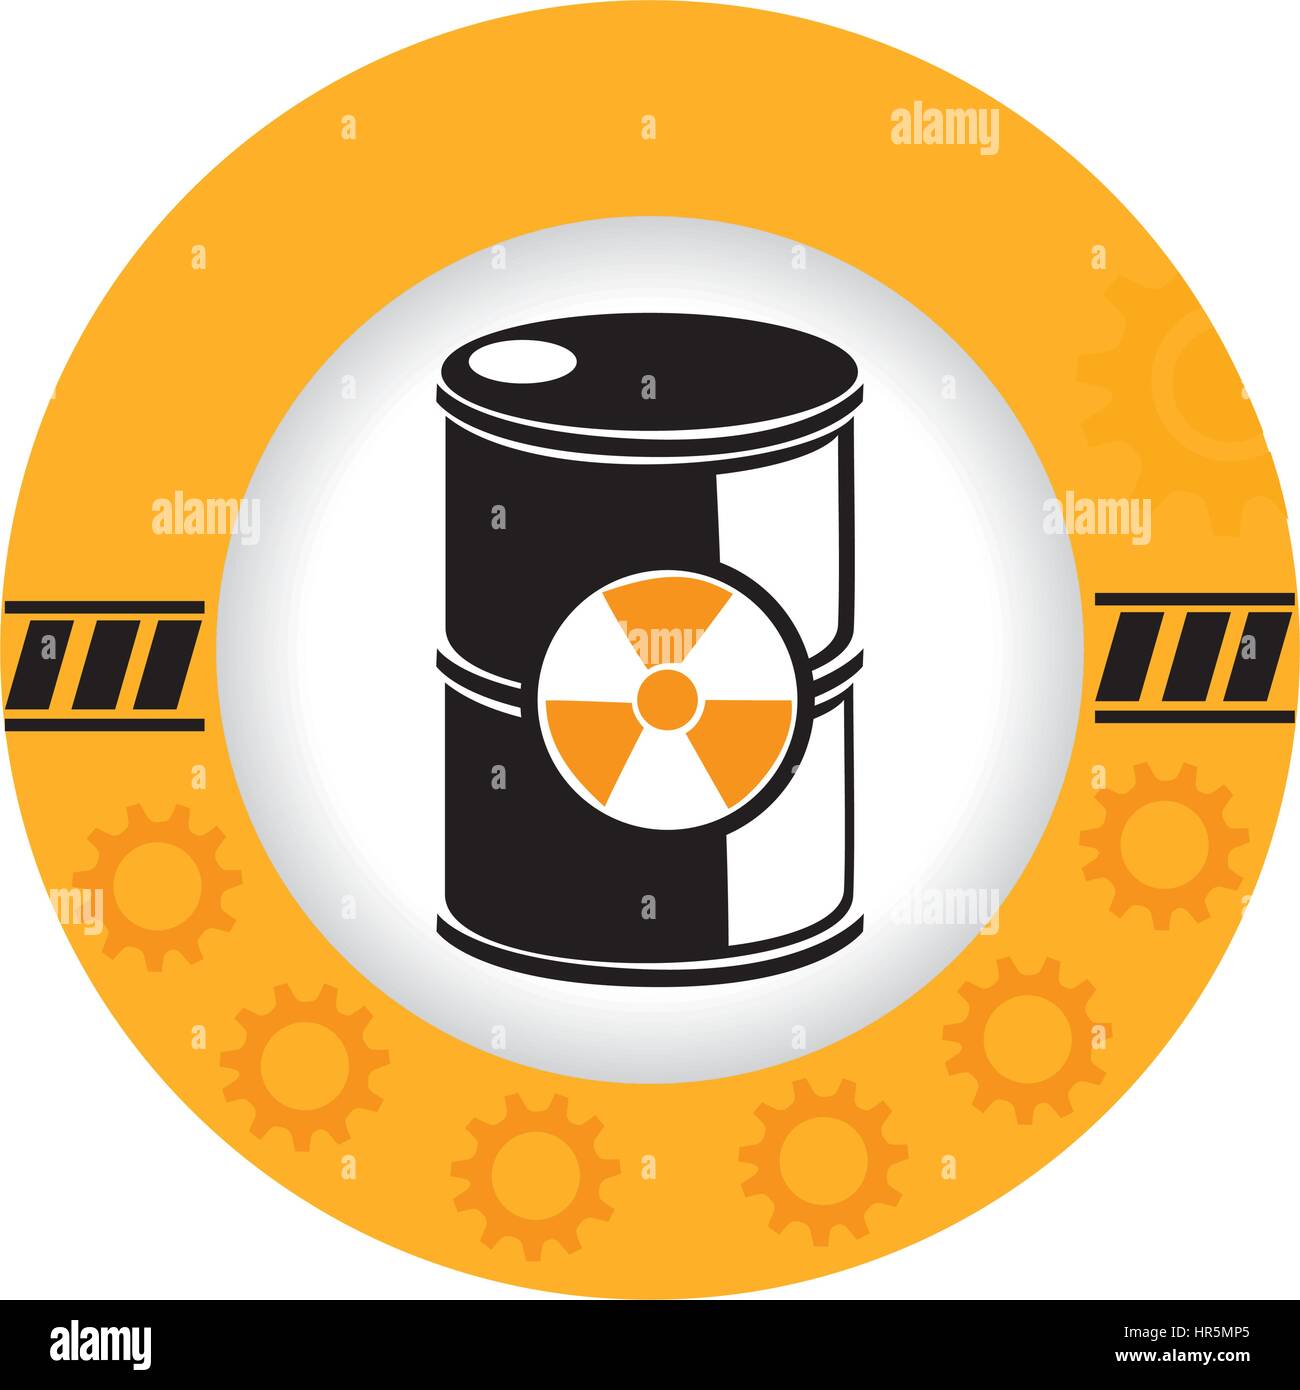 circular frame with silhouette barrels with radioactive materials Stock Vector